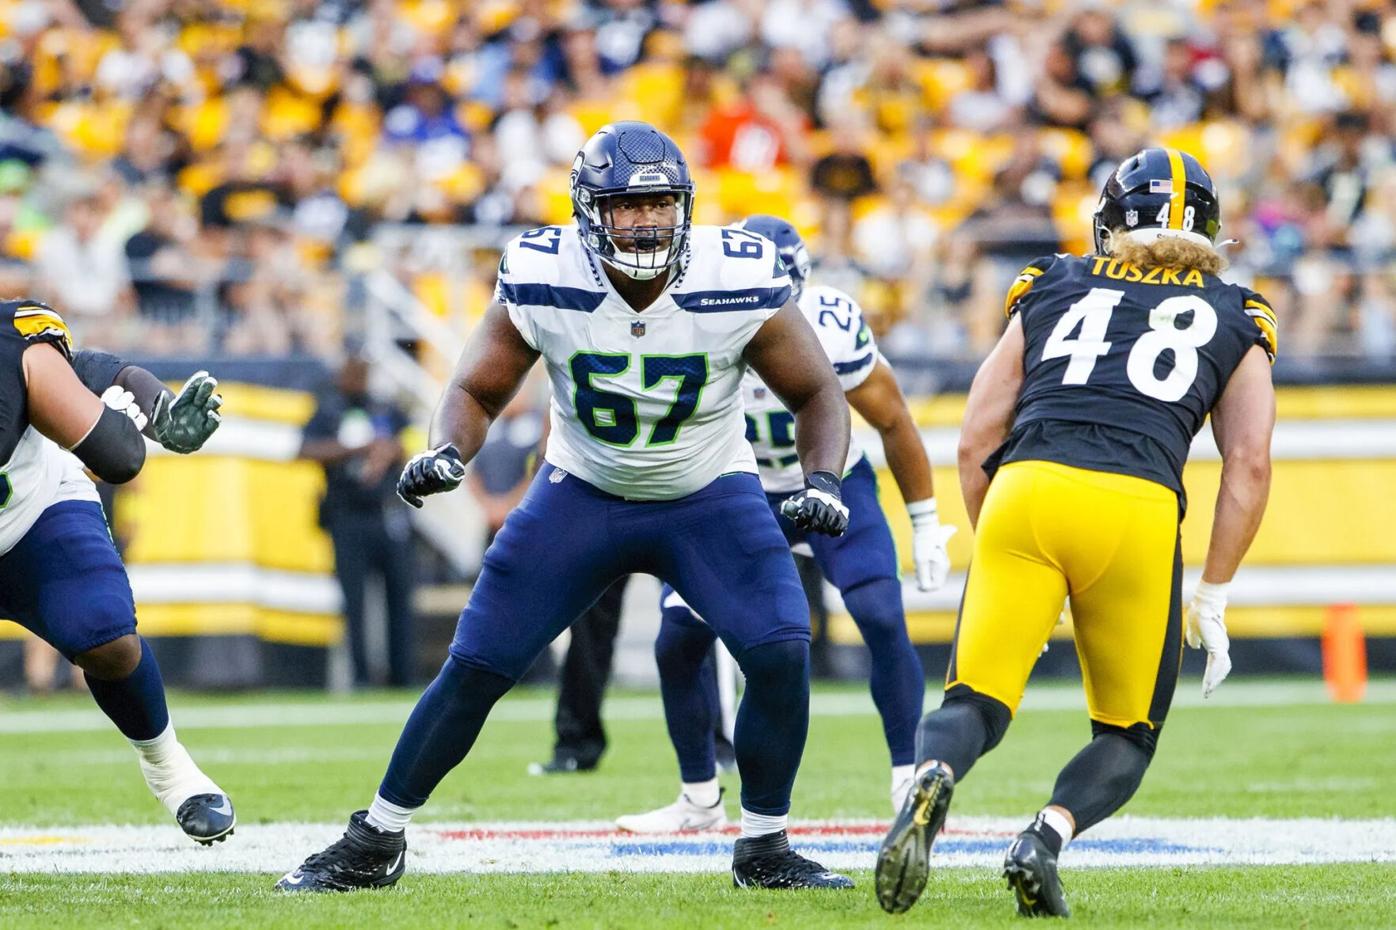 Rookies Cross, Lucas passing early tests on Seahawks O-line - The Columbian